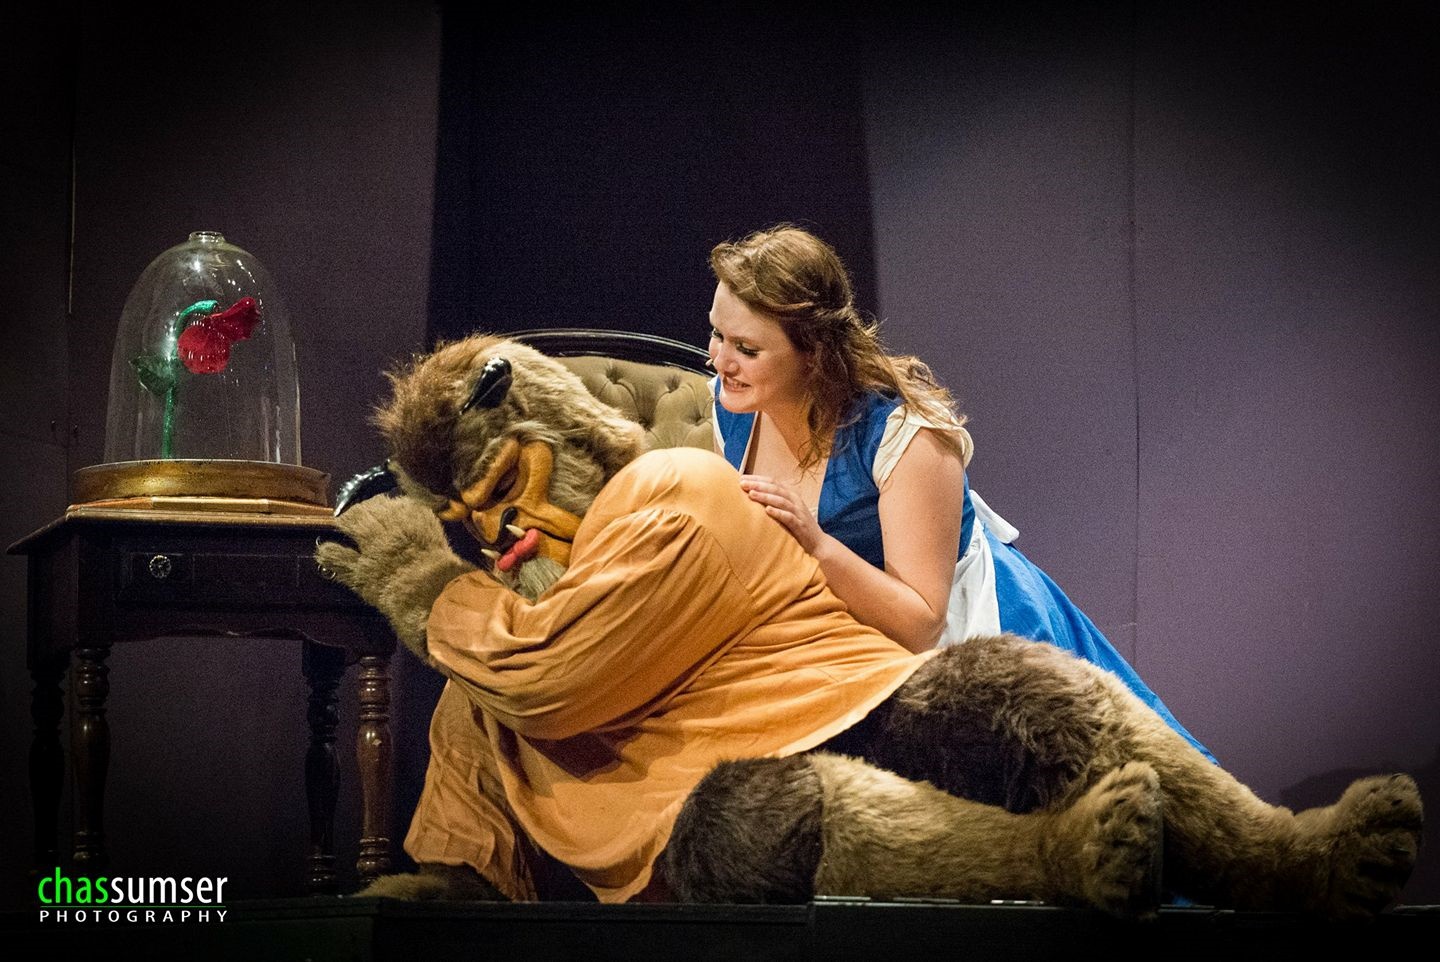 Cappies Student Reviews for Beauty and the Beast